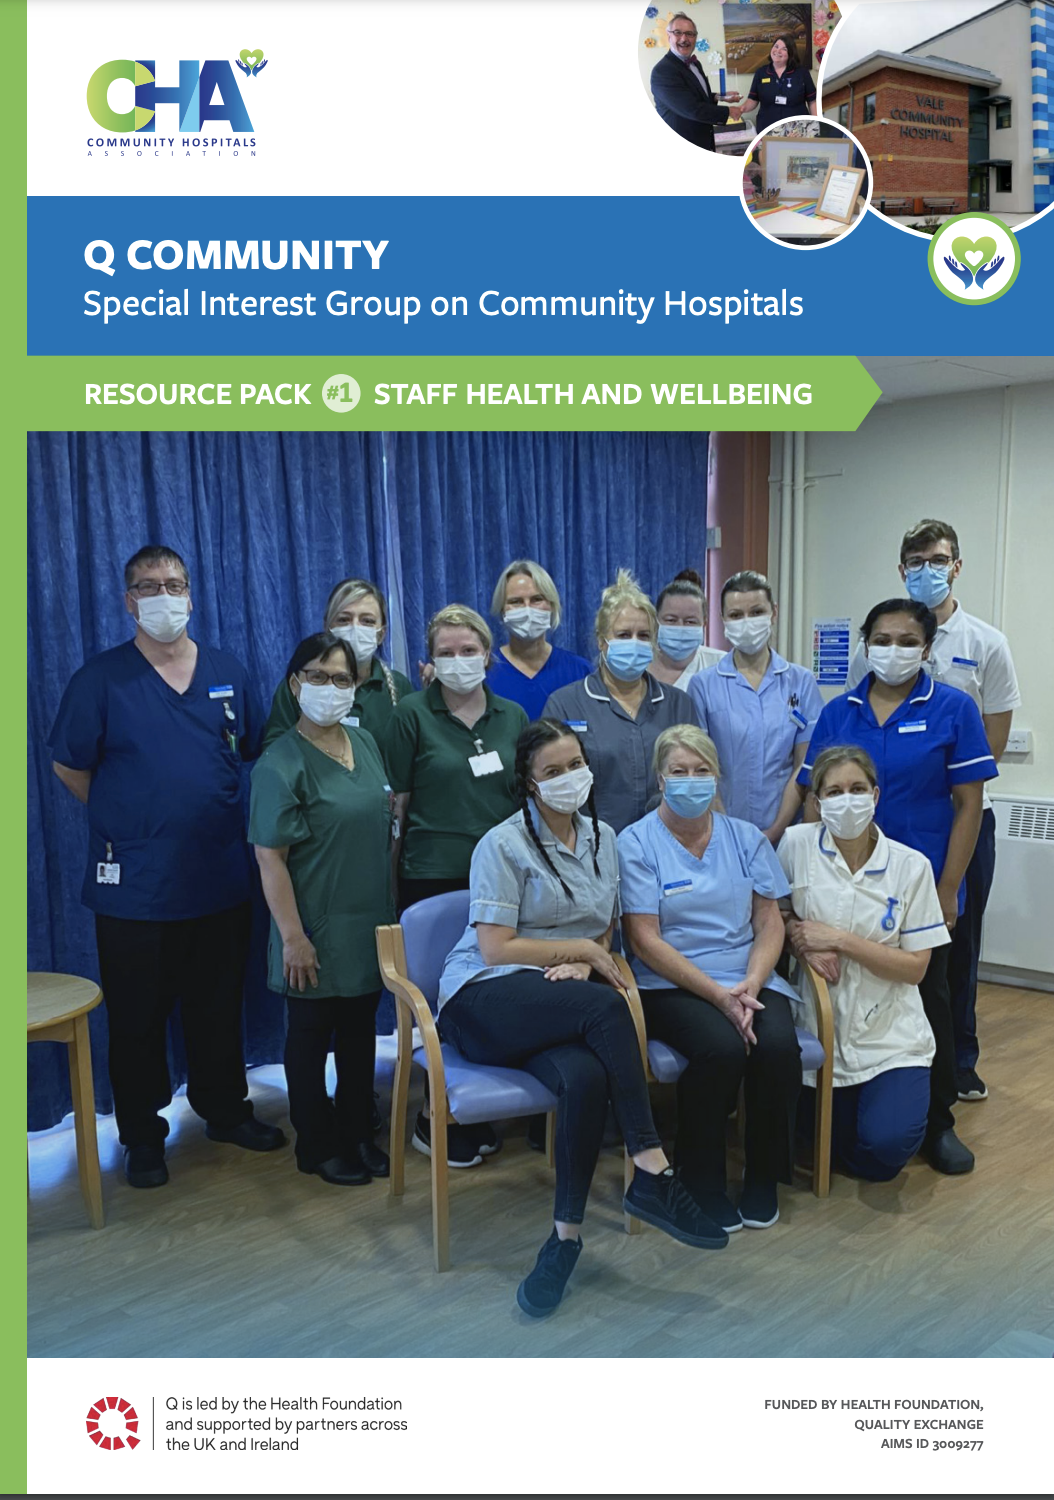 Community Hospital Resource Packs #1  Staff Health and Wellbeing featured image